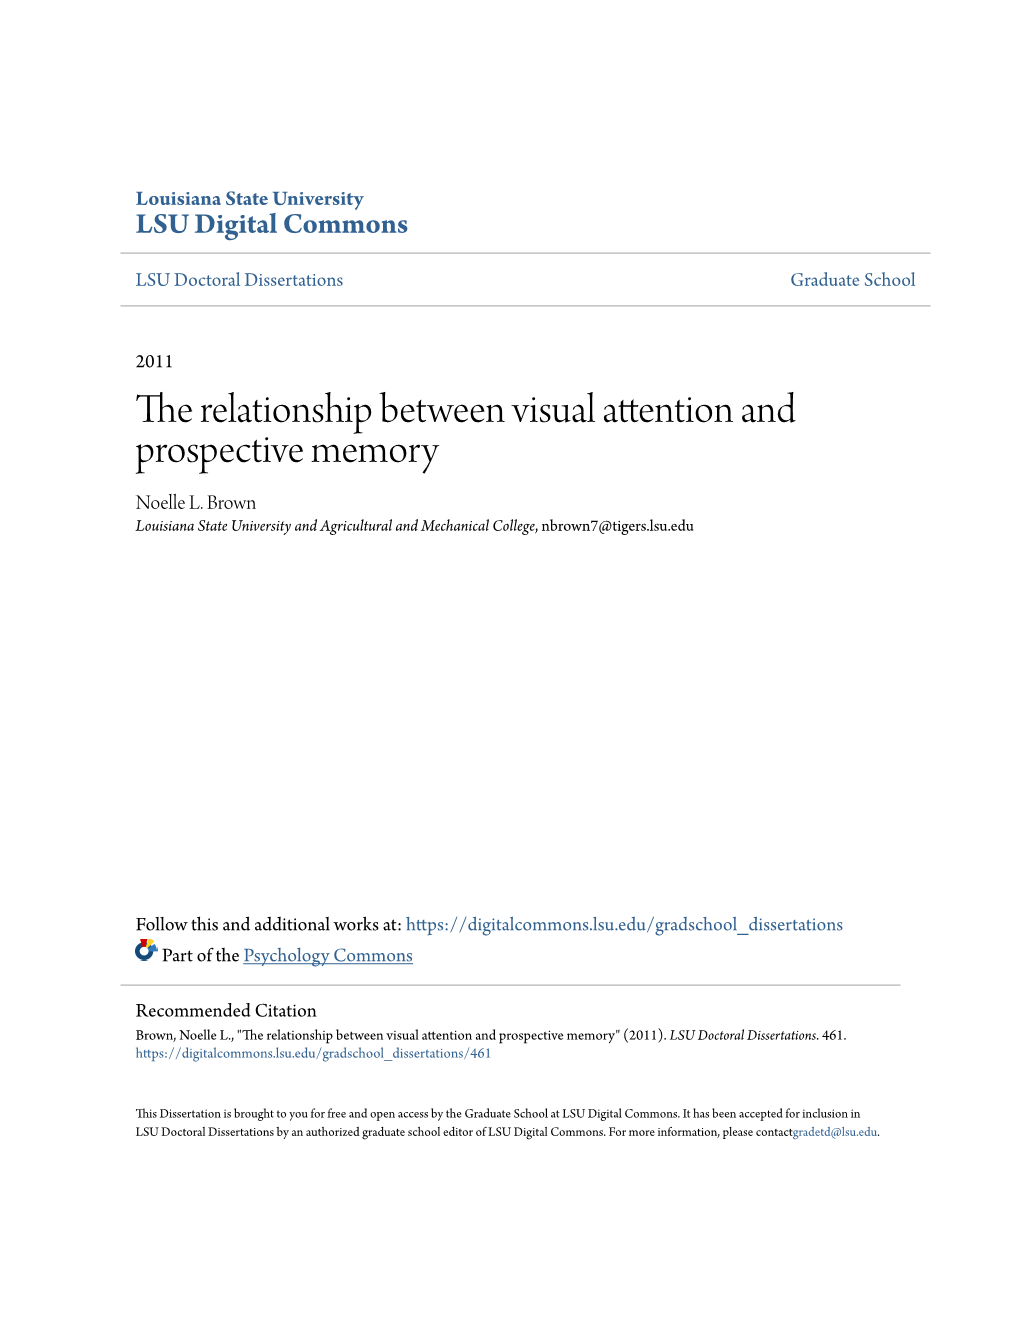 The Relationship Between Visual Attention and Prospective Memory